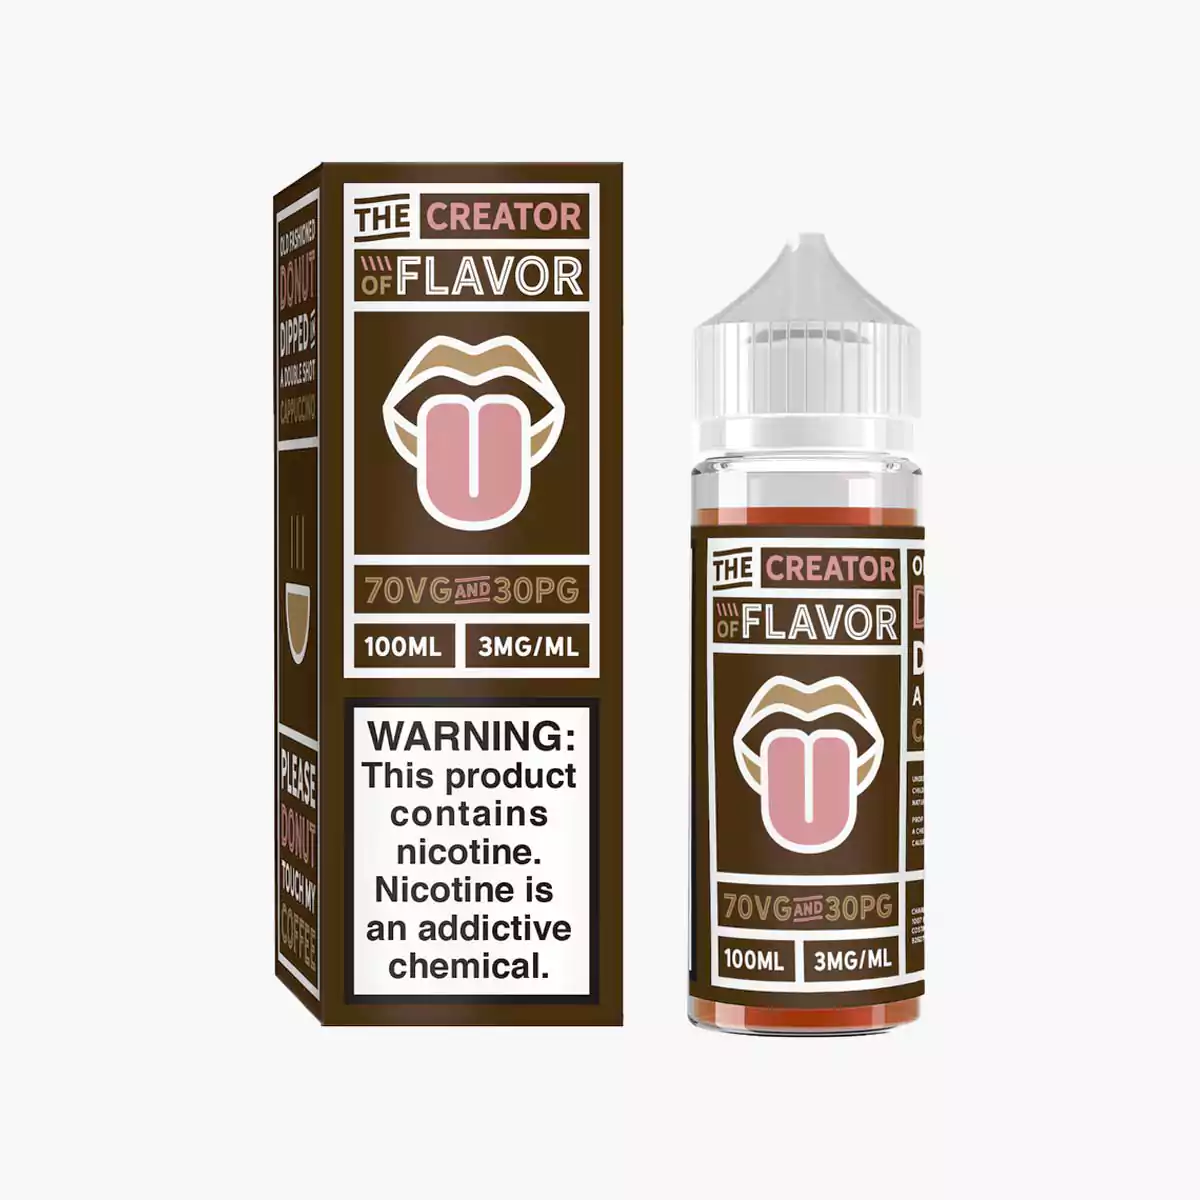 E-Juice Boxes for the Best Vape Experience